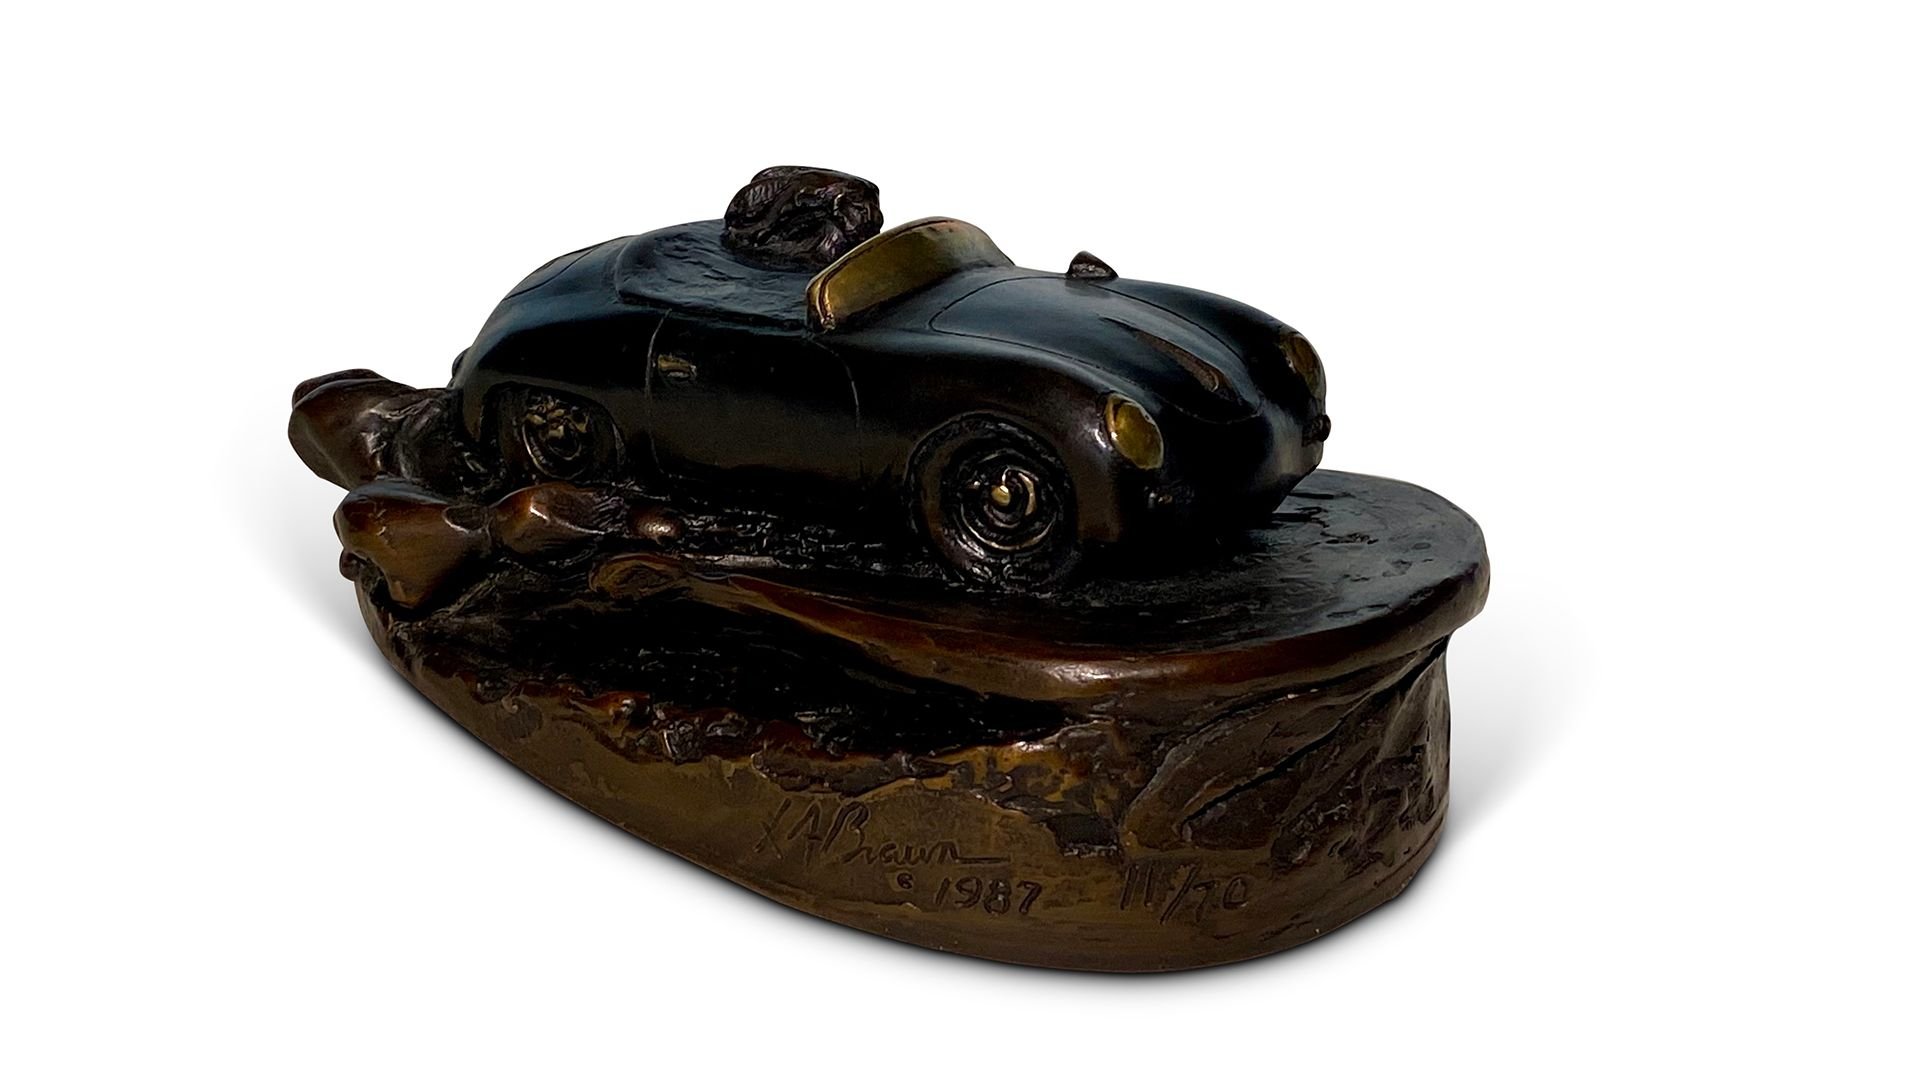 For Sale "California Carrera" by Larry Braun, 1987, No. 11 of 70